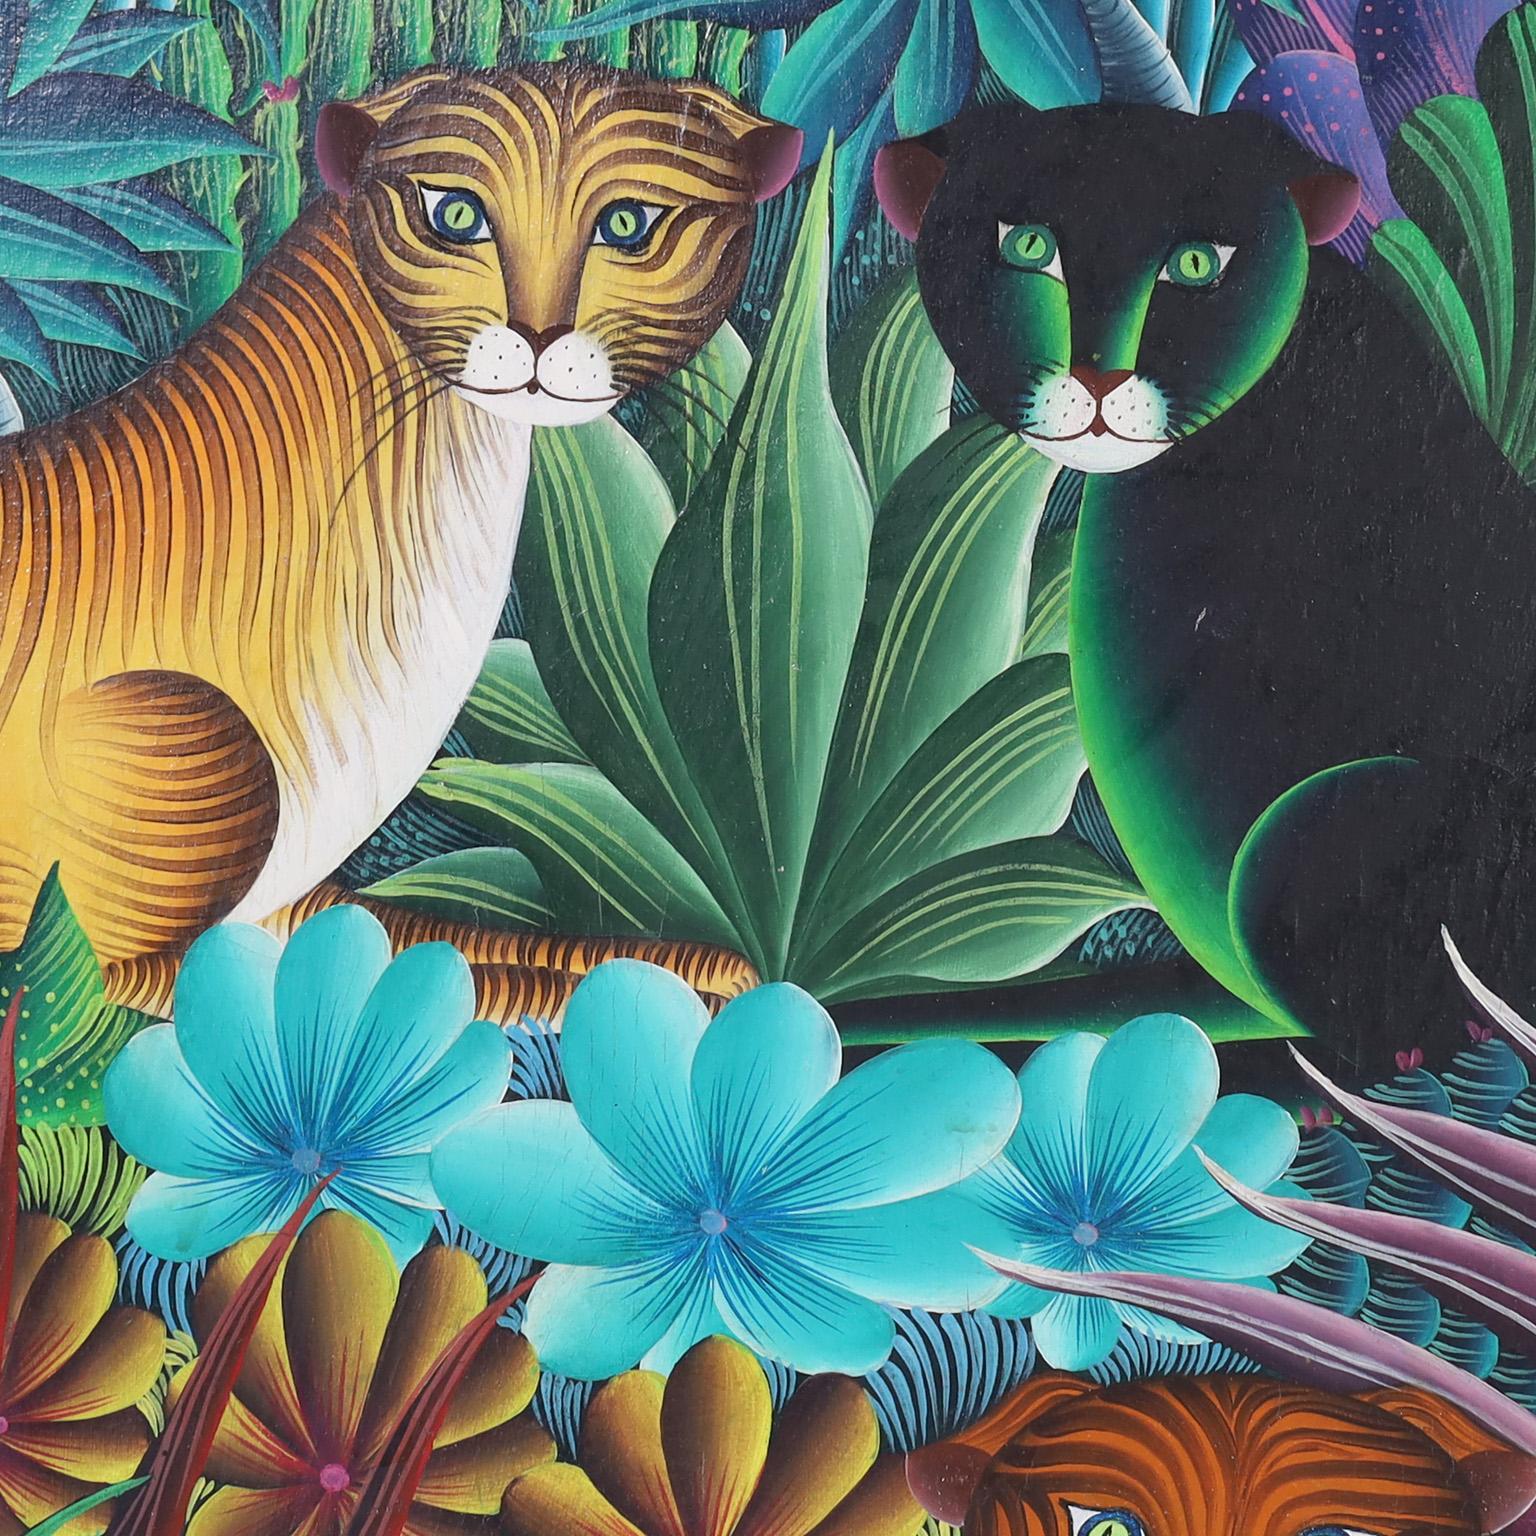 Painting on Canvas of Cats in a Jungle In Good Condition For Sale In Palm Beach, FL